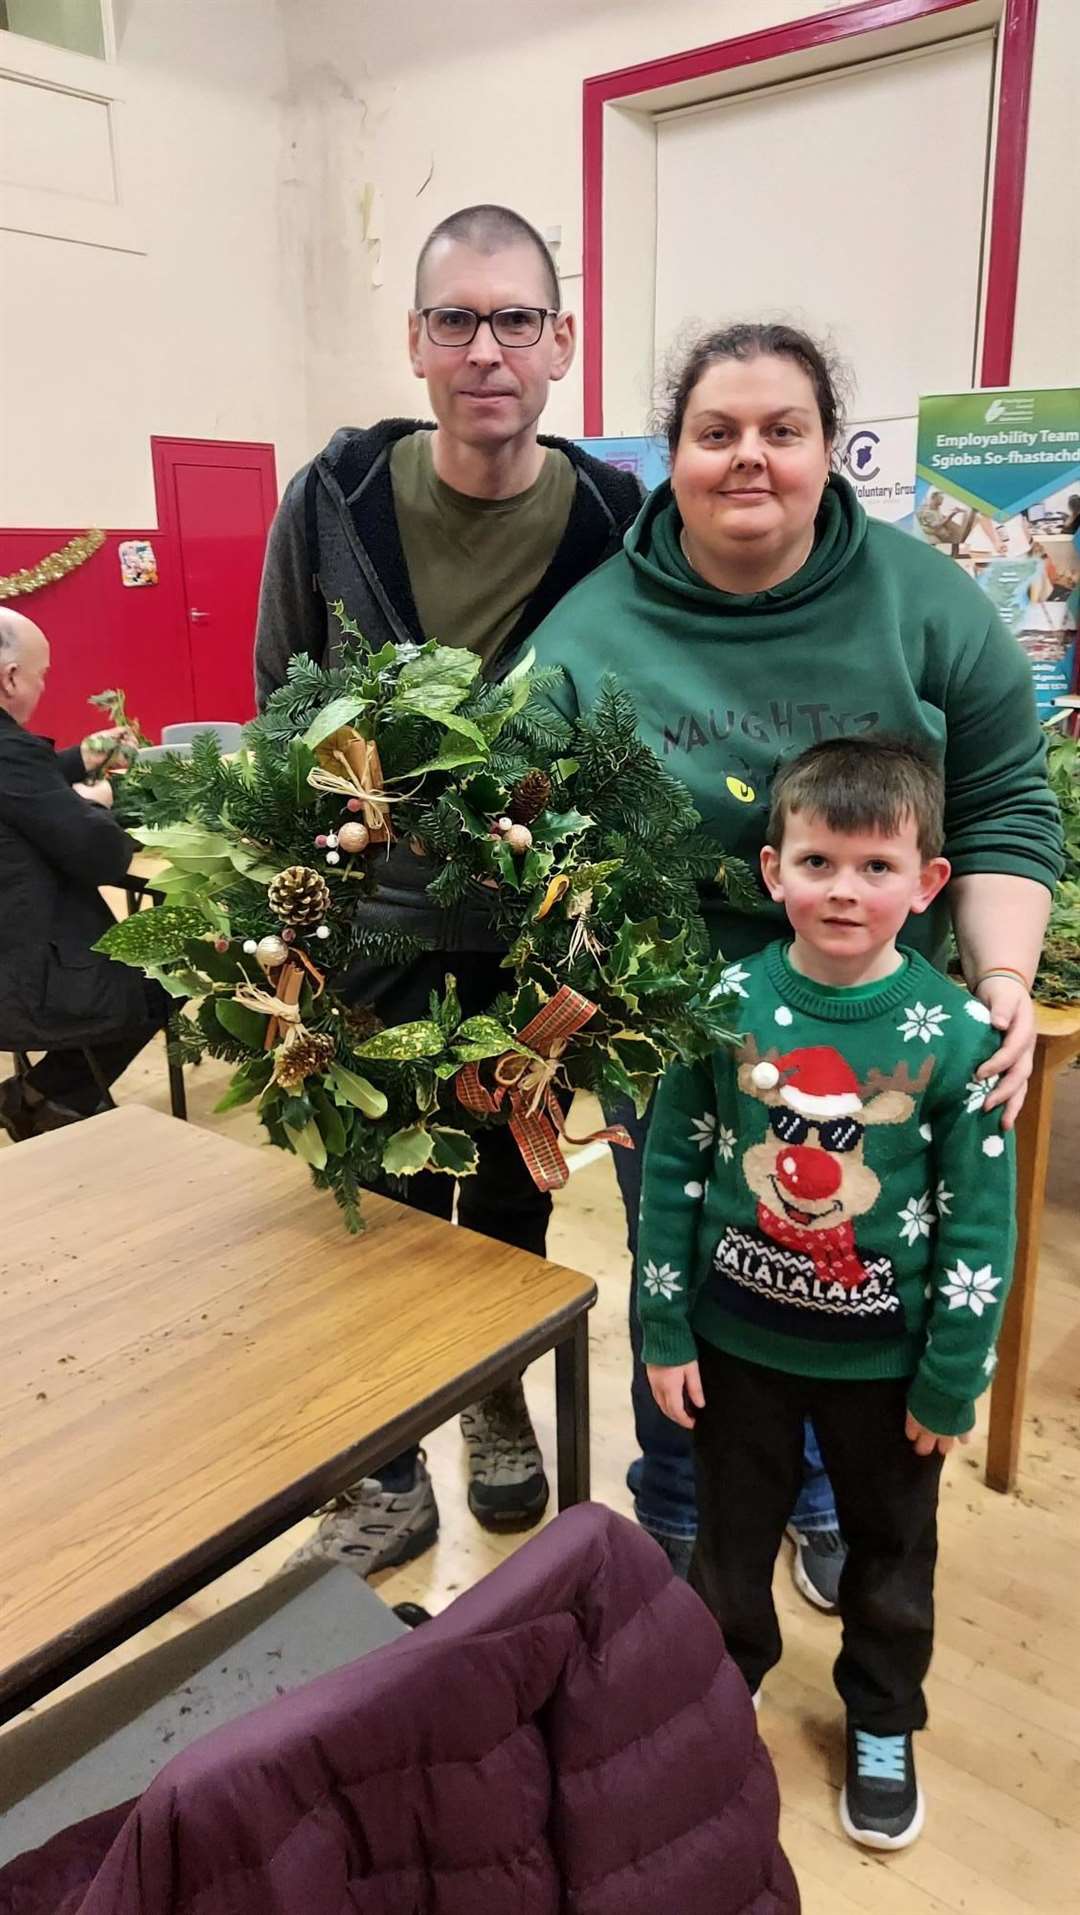 One of the families who enjoyed the festive wreath making event